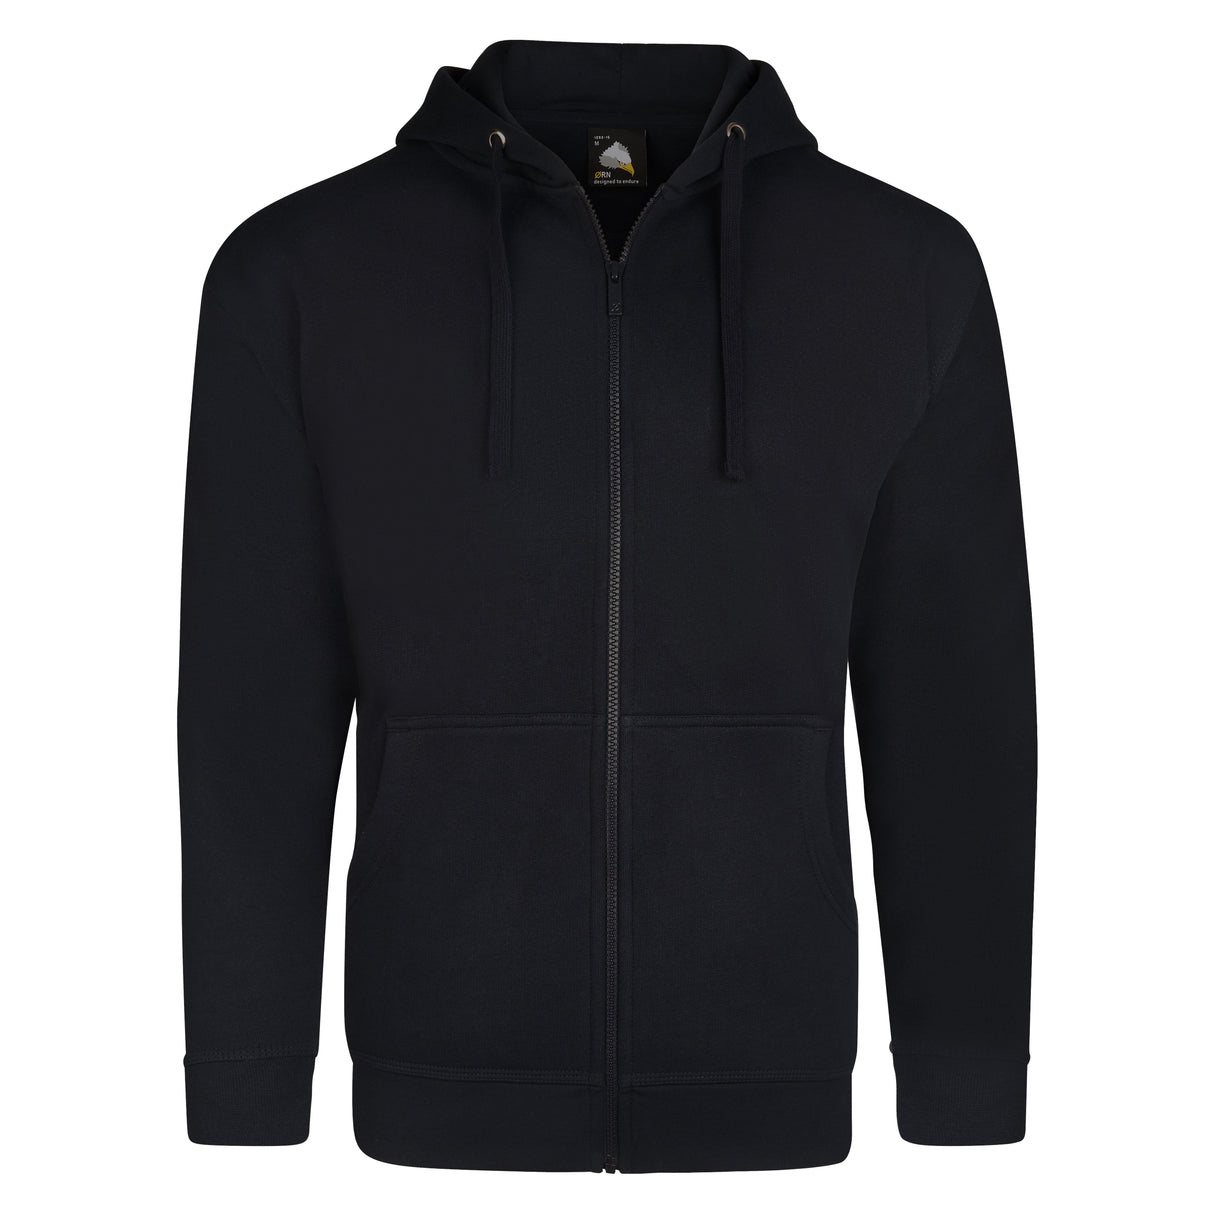 Orn Clothing Macaw Zipped Hoodie